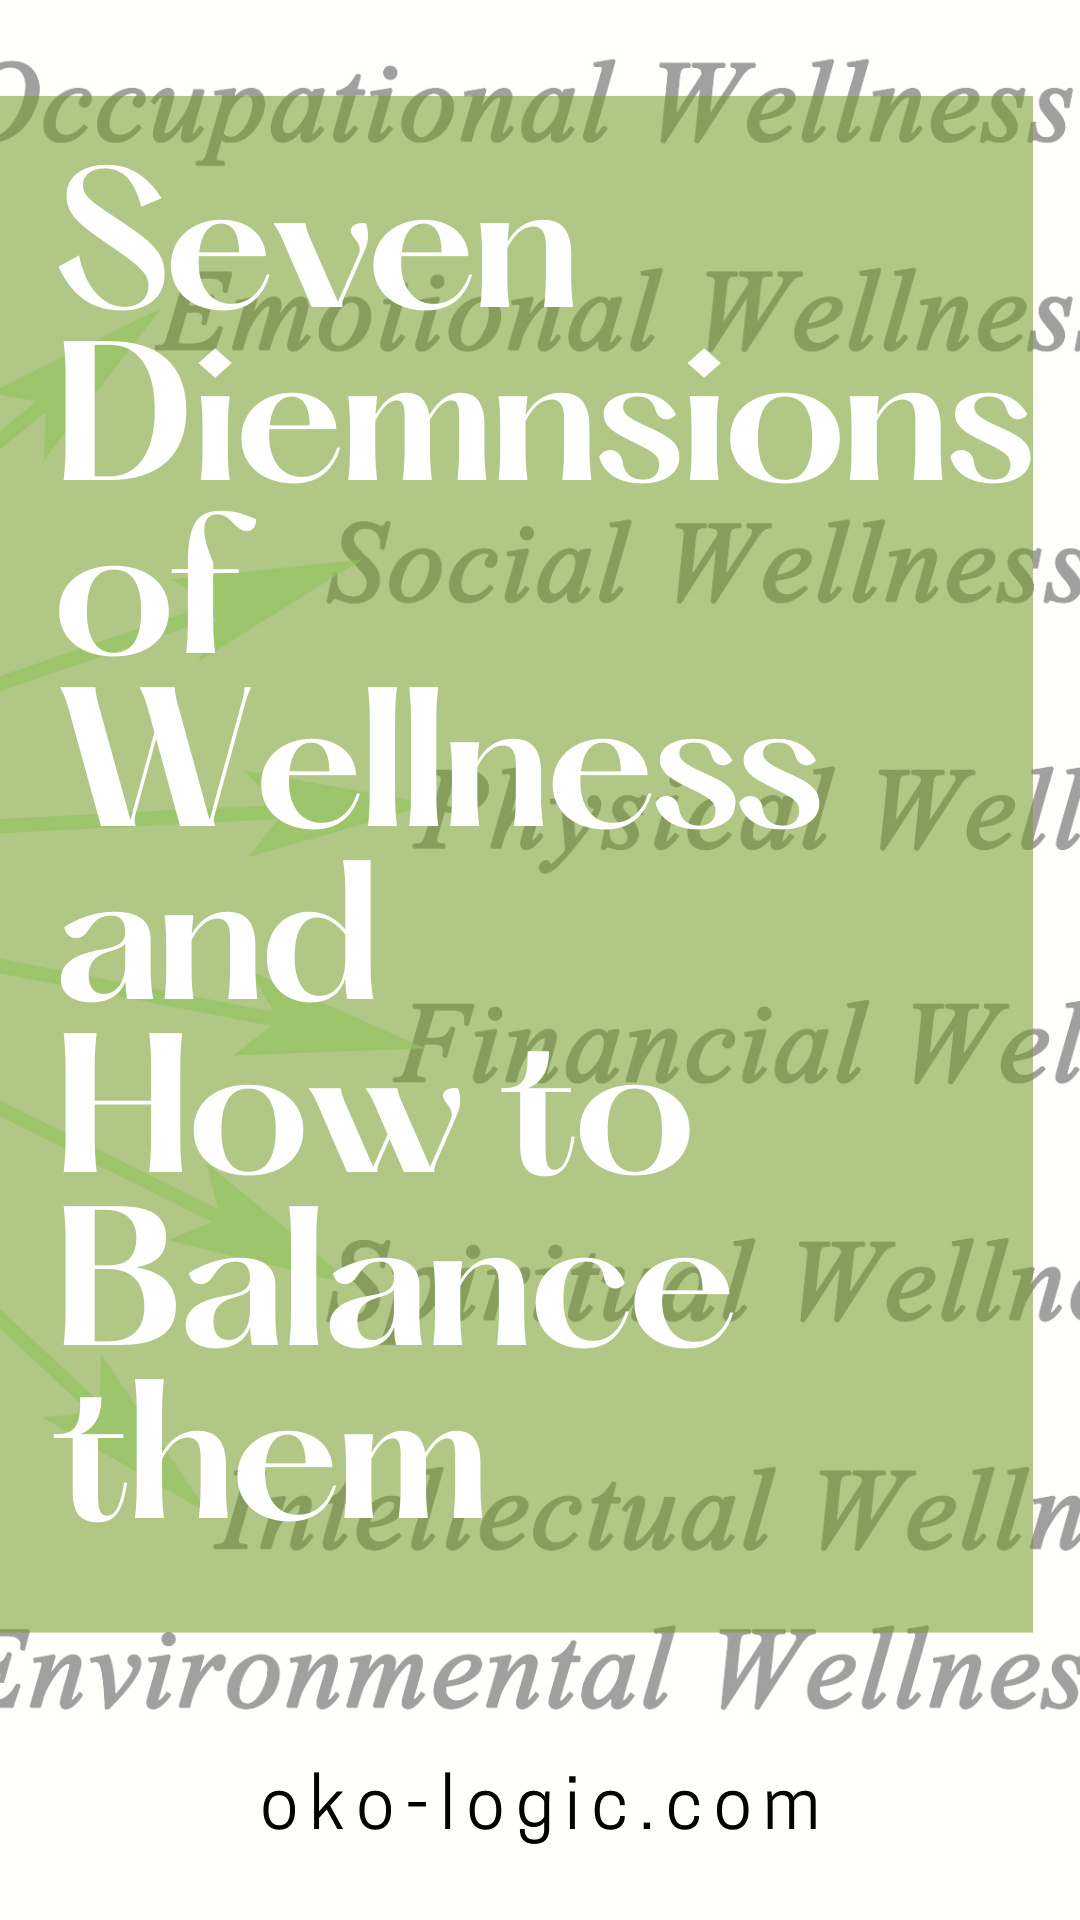 How to Balance the 7 Dimensions of Holistic Health and Wellness